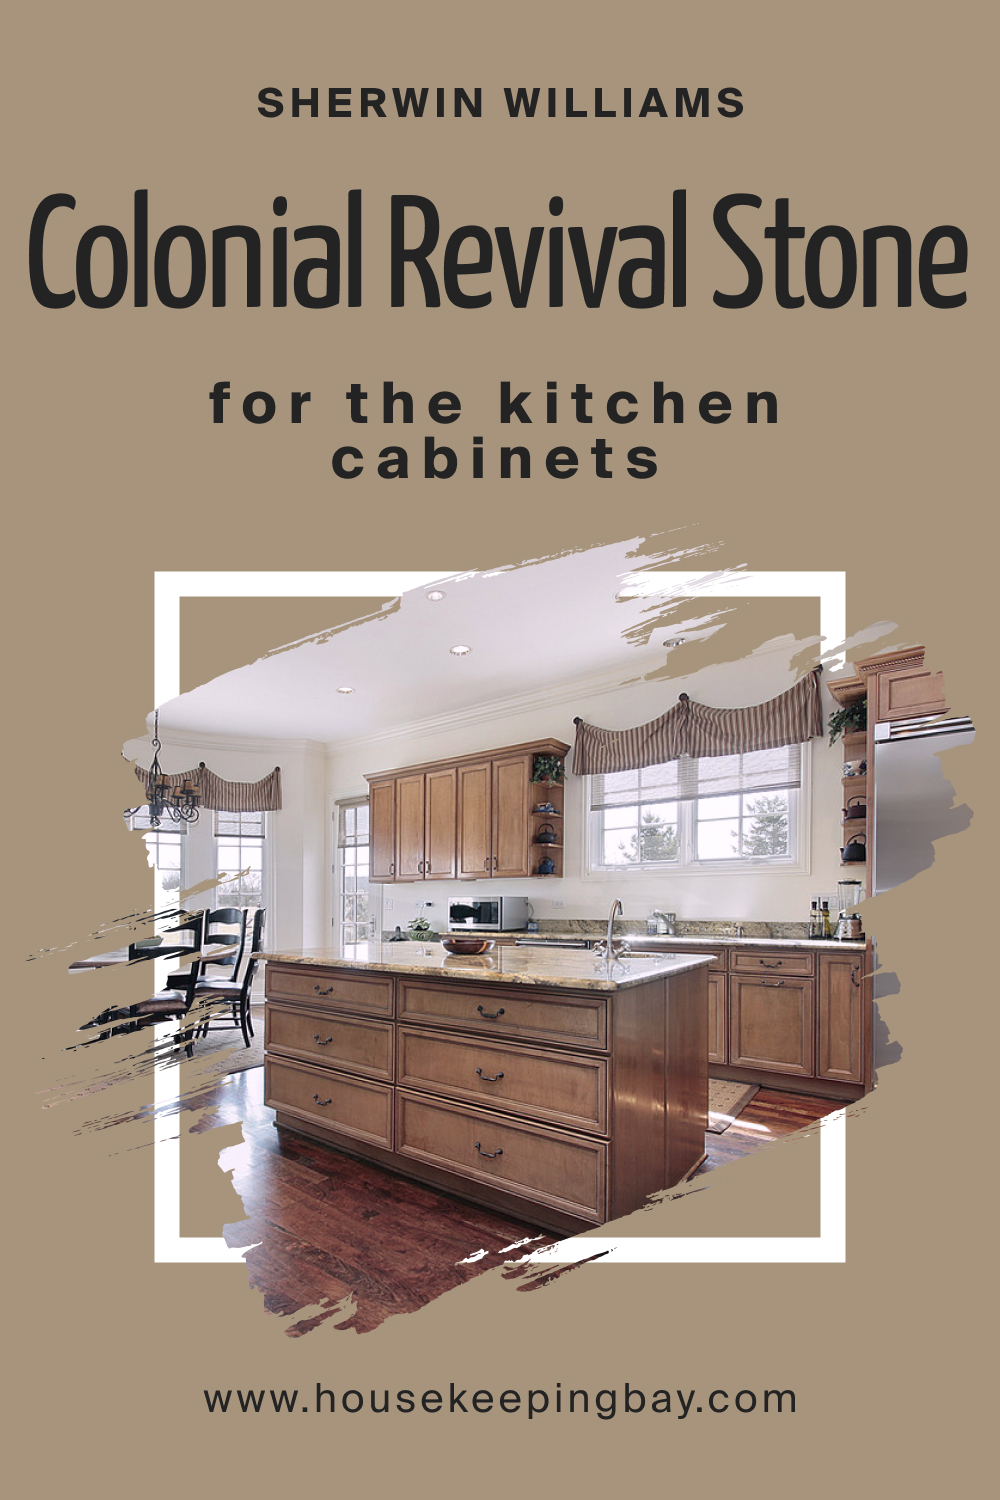 Sherwin Williams. SW 2827 Colonial Revival Stone For the Kitchen Cabinets